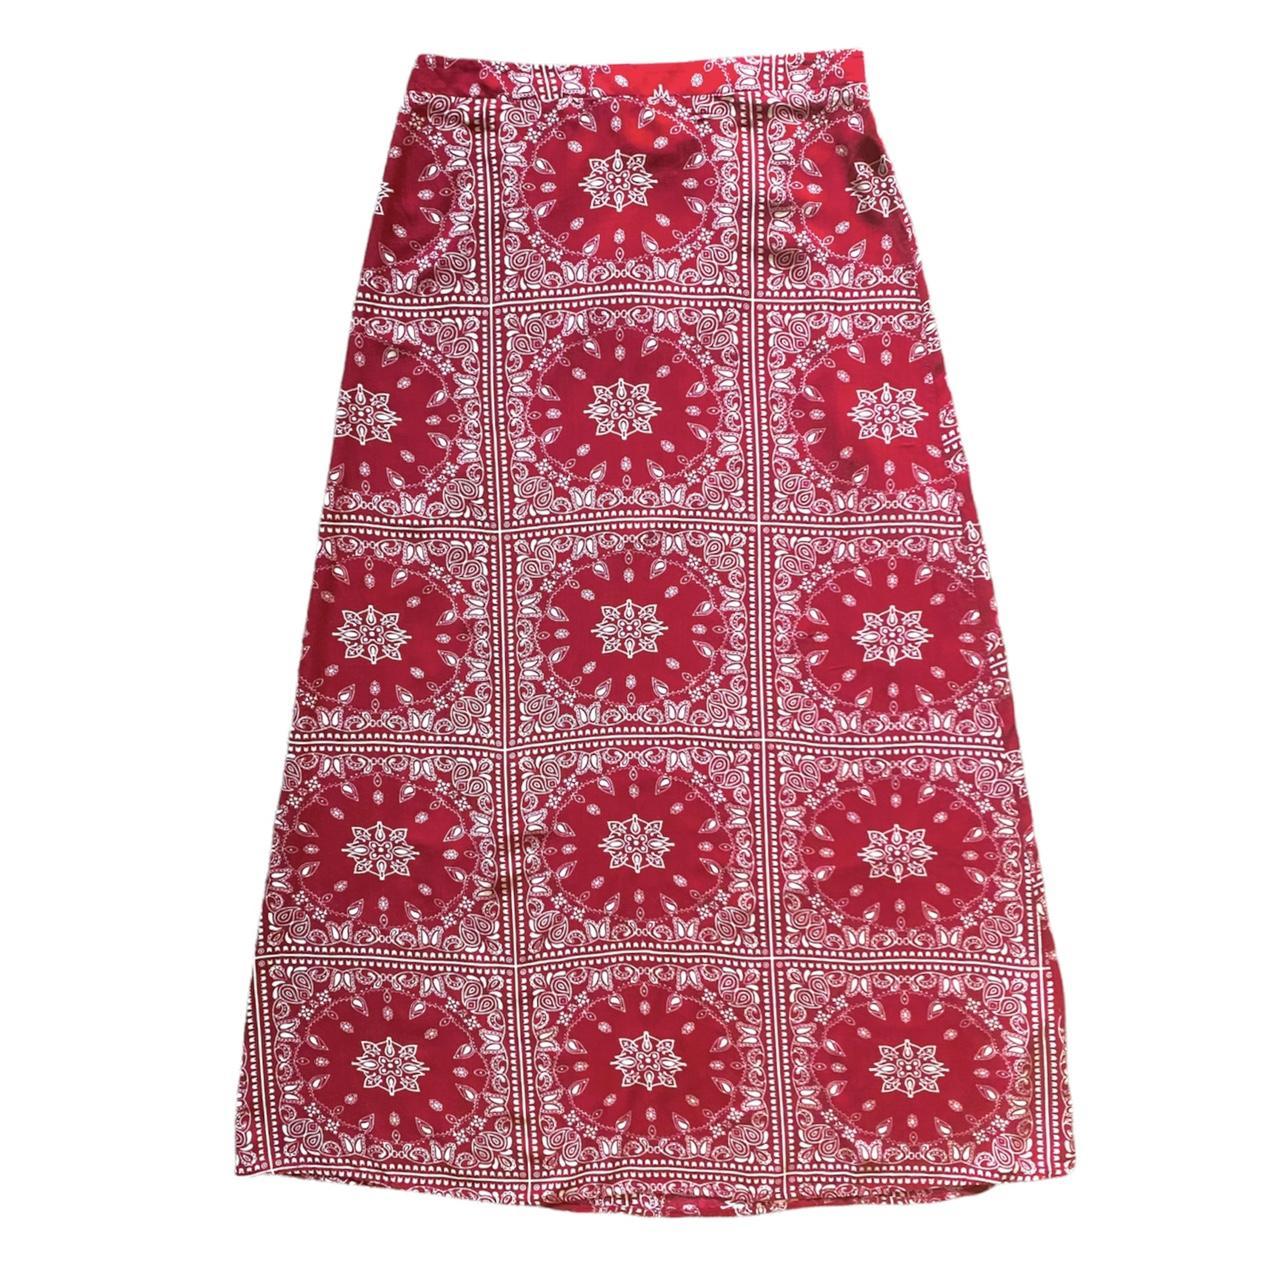 Product Image 1 - the roxanne skirt 💌

ॐ root